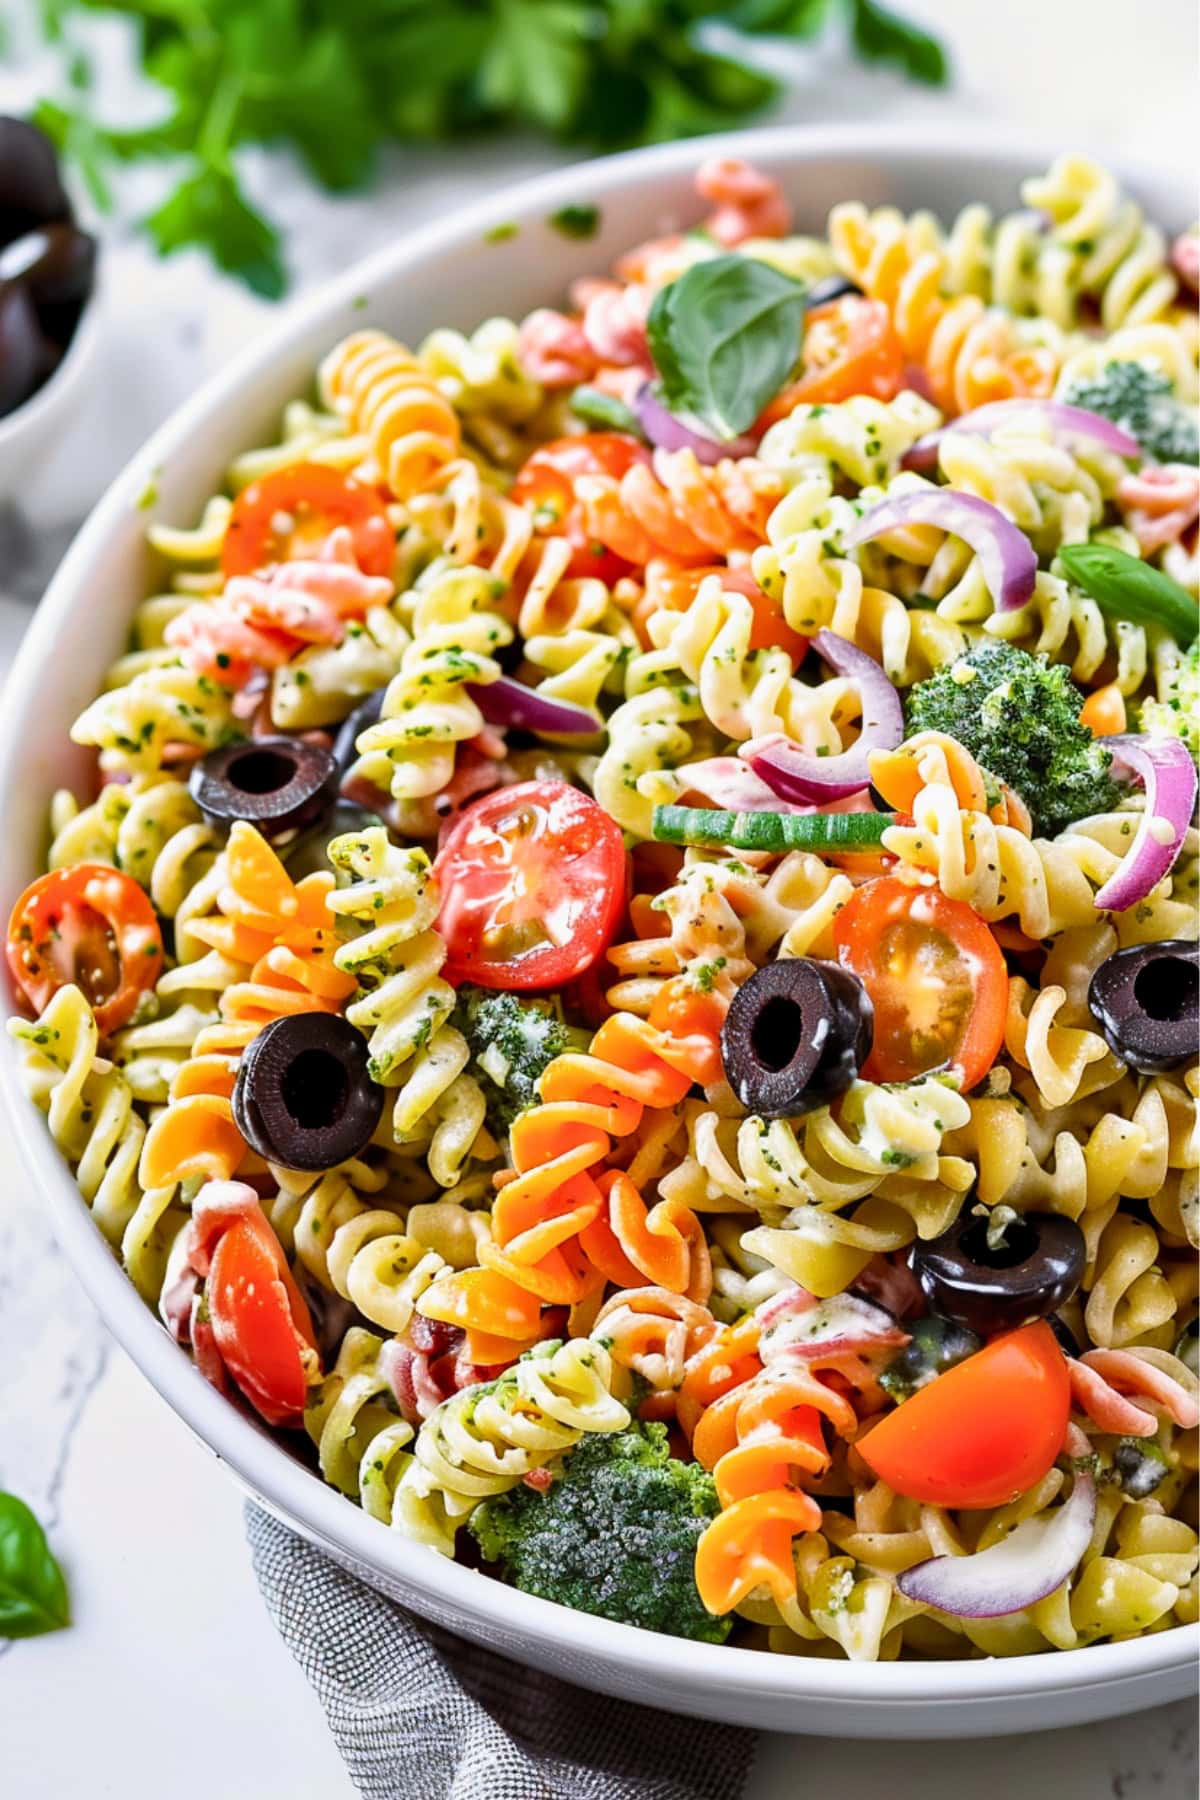 Tri color rotini pasta salad with creamy dressing with fresh herbs, pesto, veggies, and cheese served in a white bowl.